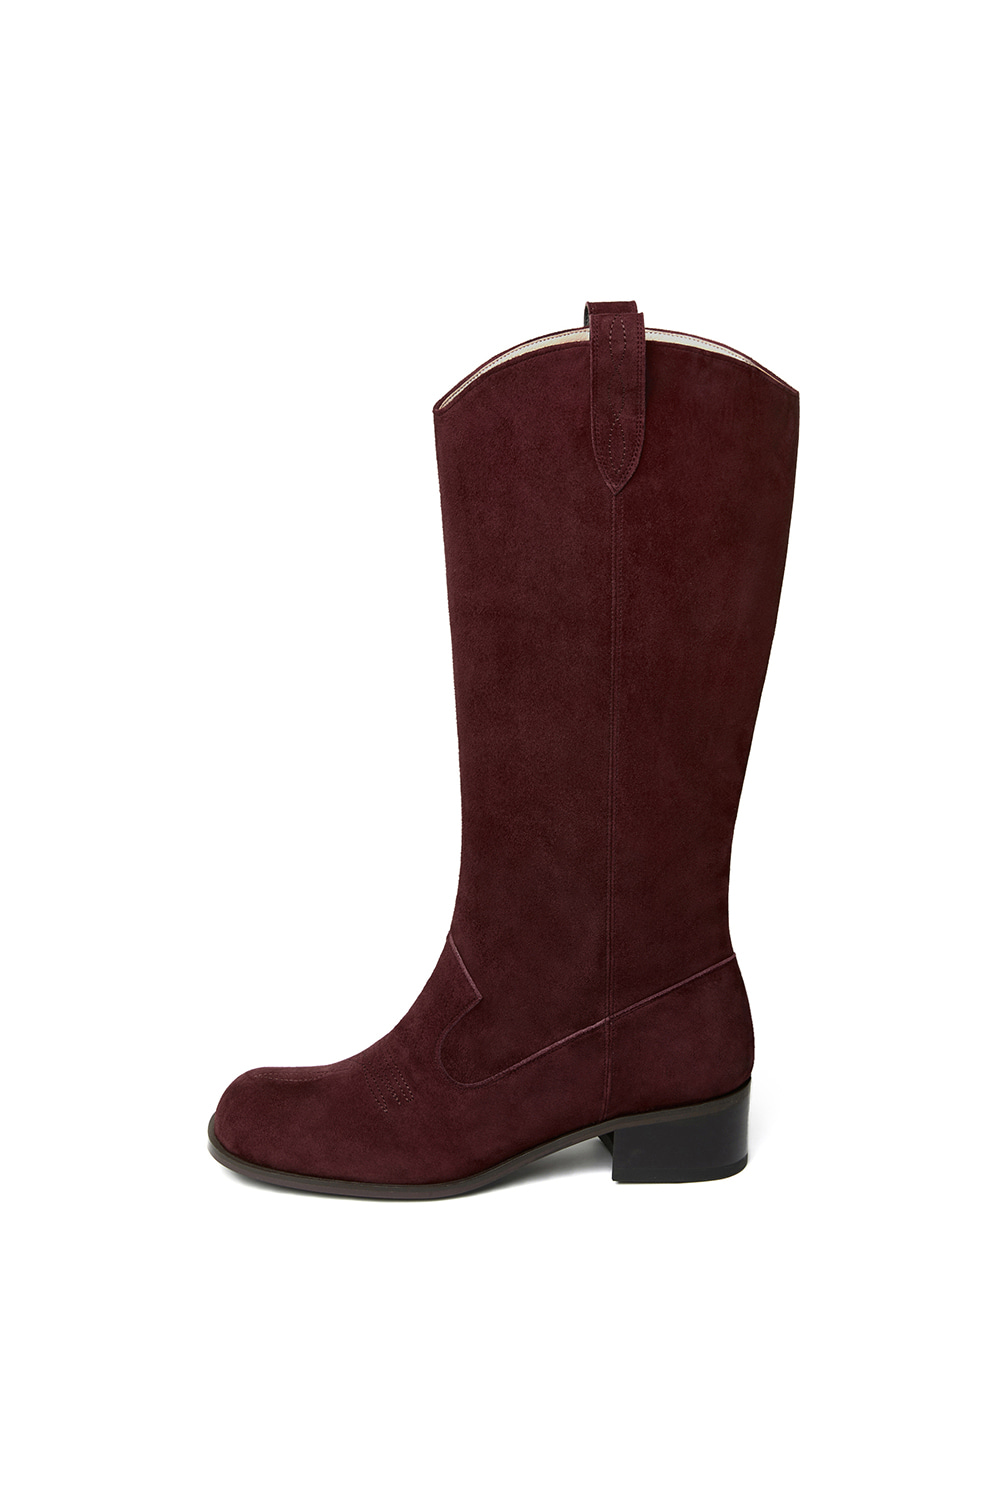 WESTERN ROUND SQUARE TOE LONG BOOTS [BURGUNDY]		